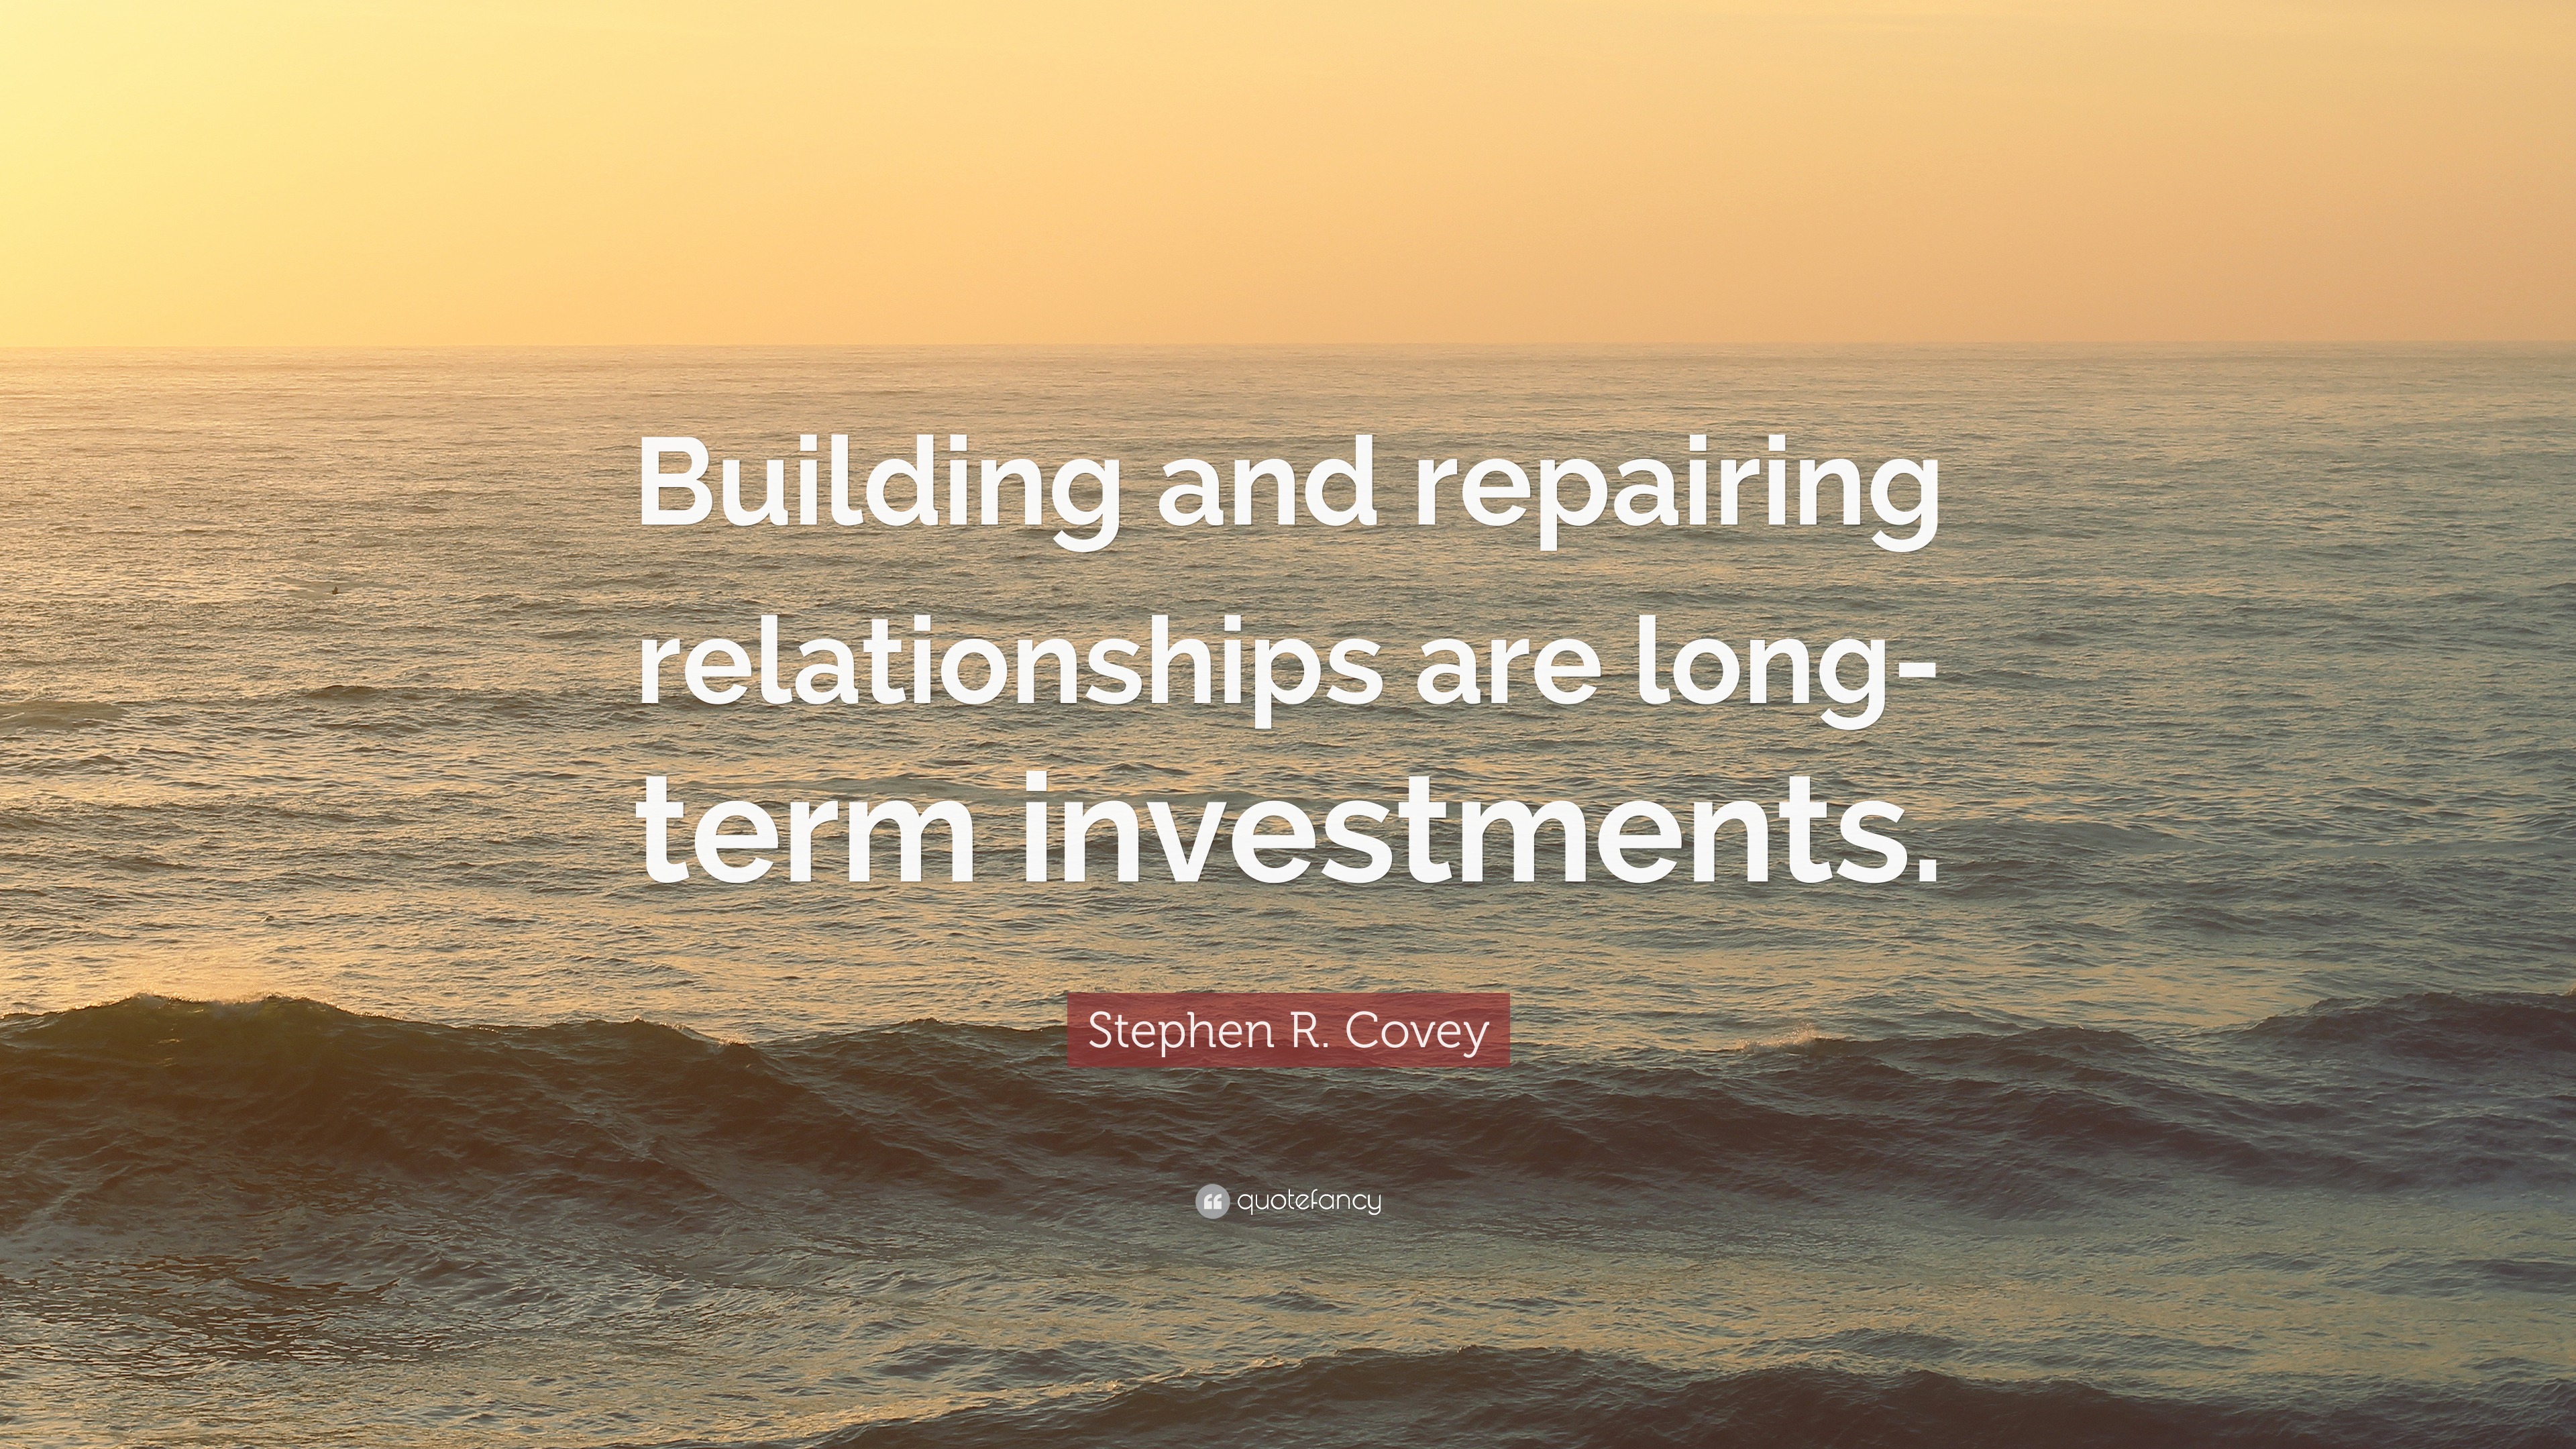 Stephen R. Covey Quote: “Building and repairing relationships are long